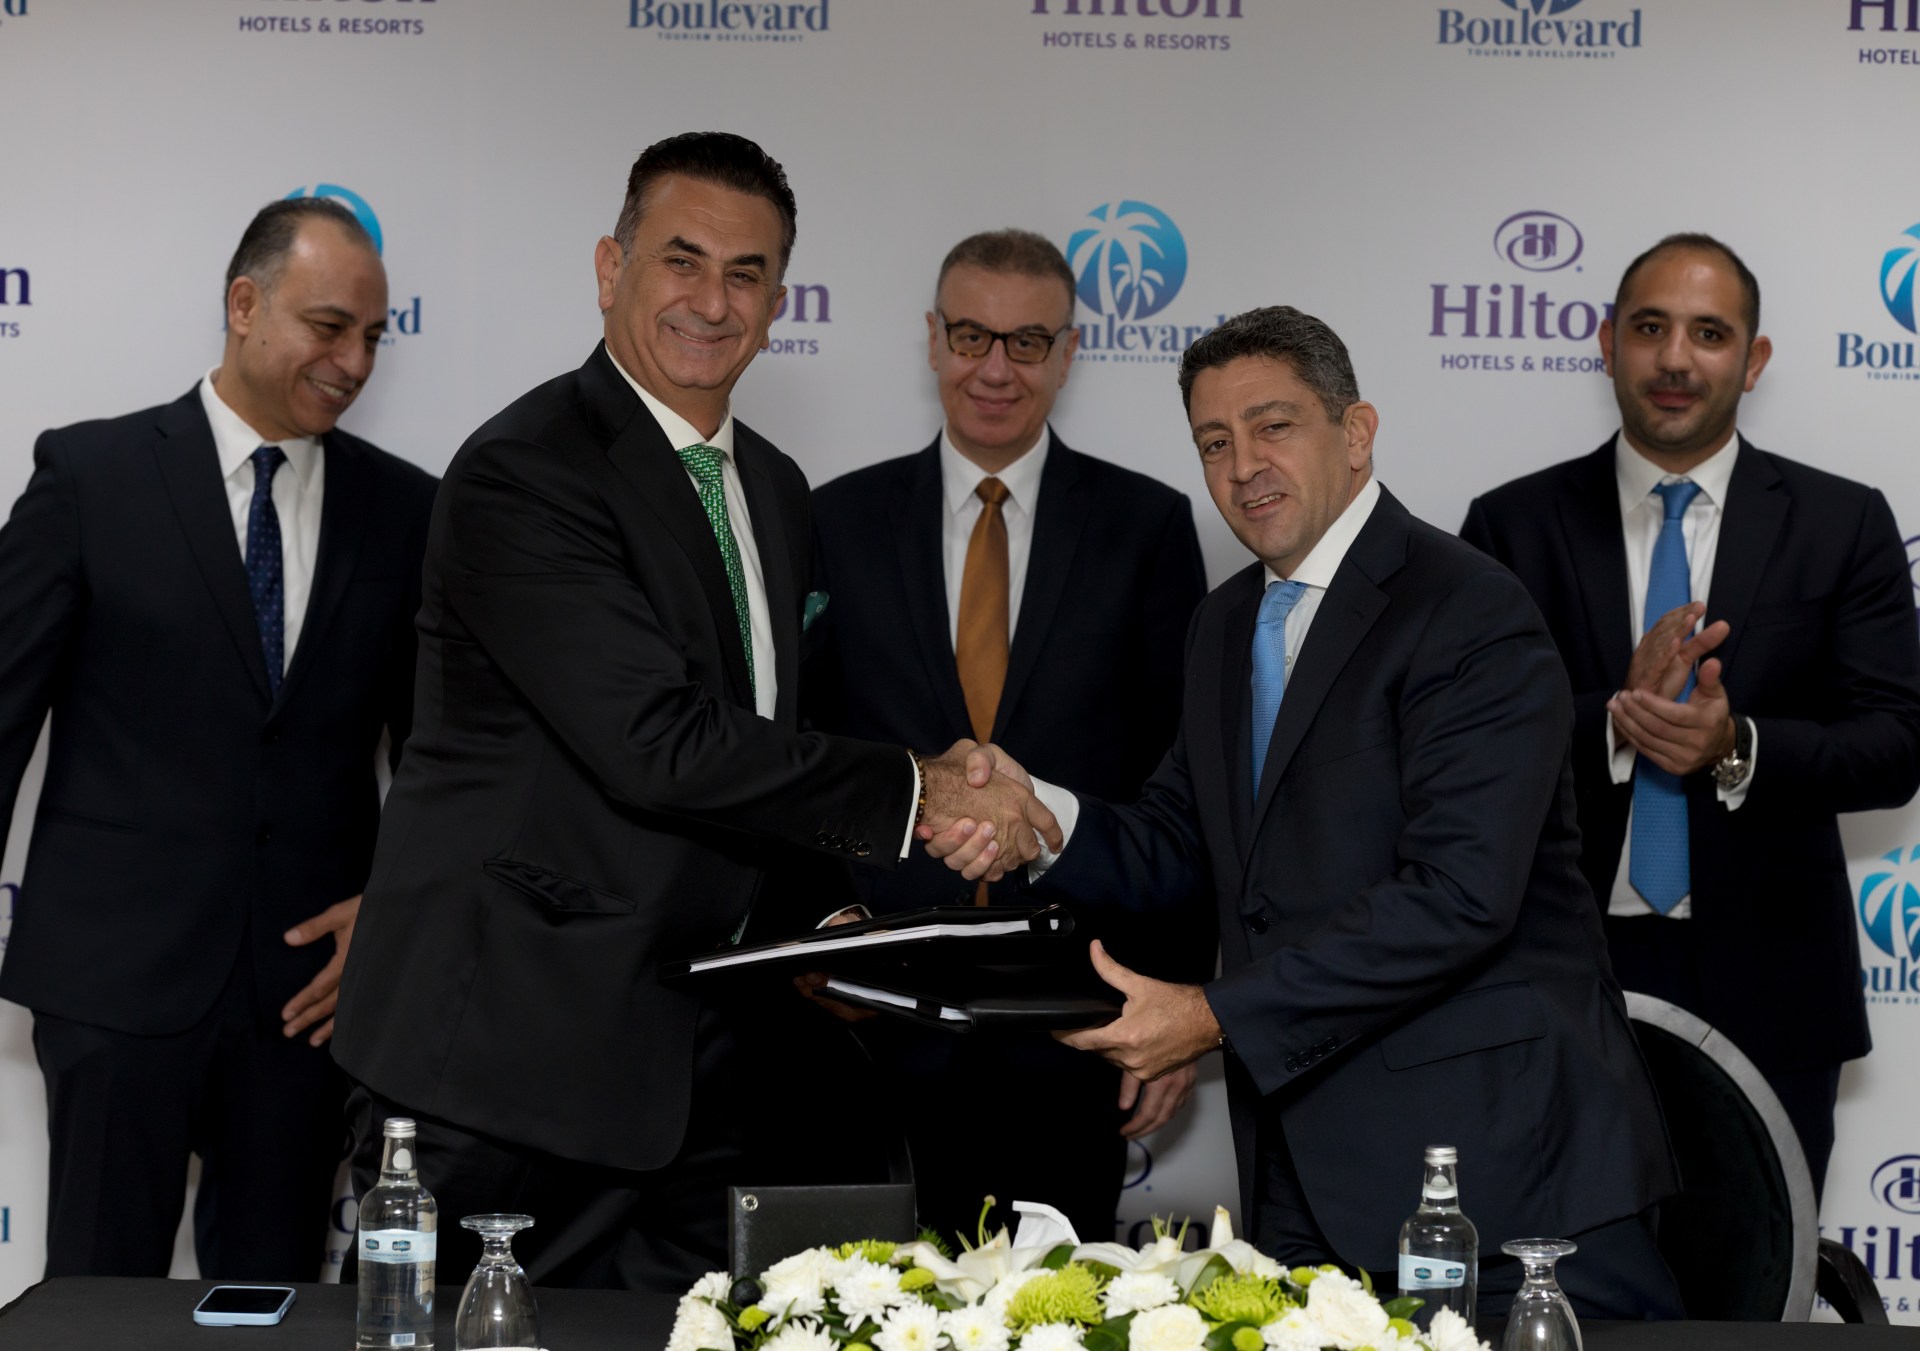 From right to left: Carlos Khneisser, vice president, Development, Middle East & Africa, Hilton shaking hands with Maged Shafik, Founder & Managing Director, Boulevard for Tourism Development.